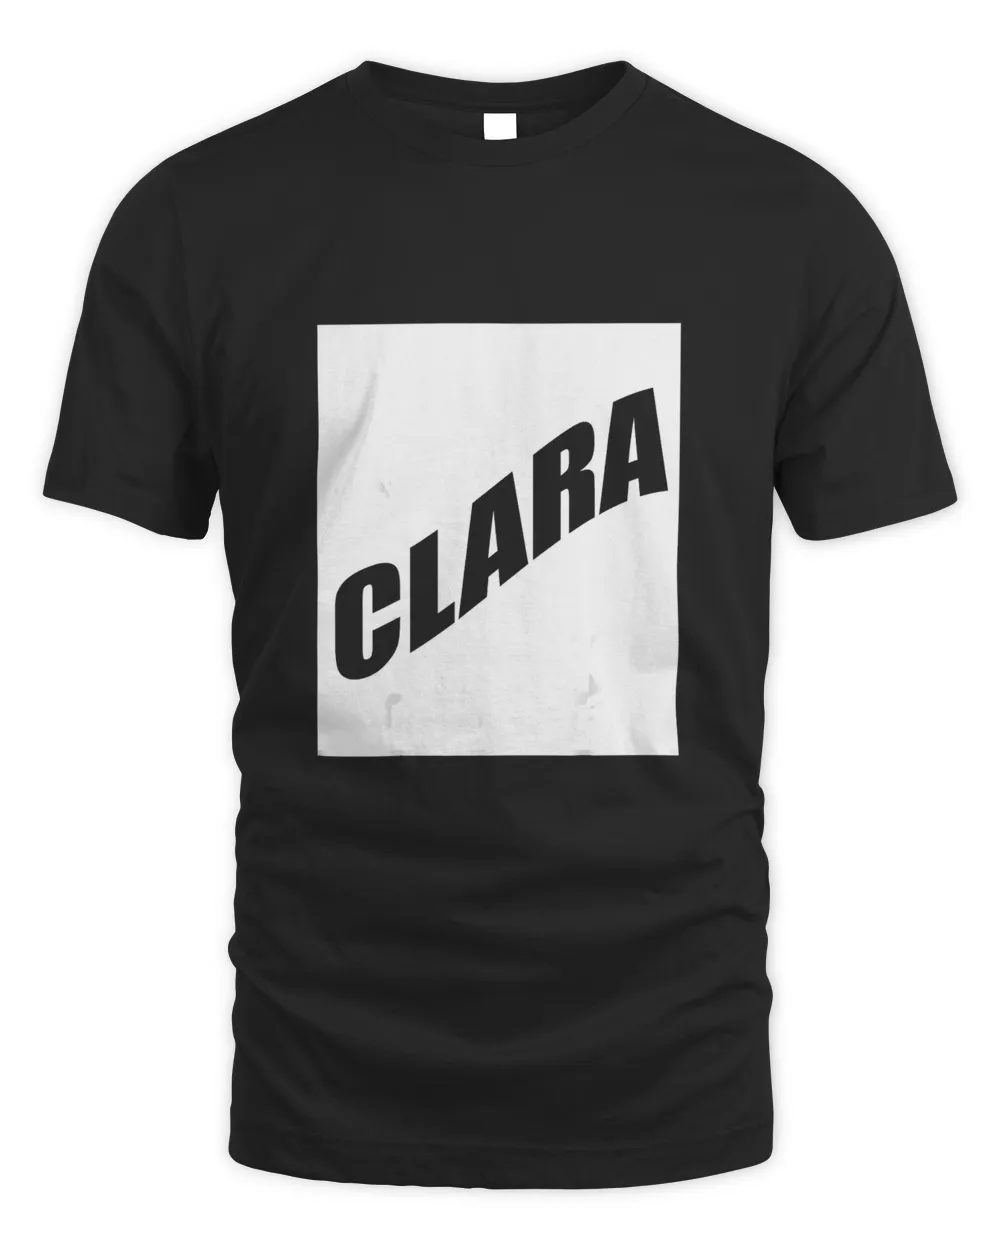 Clara Girlfriend Valentine Daughter Wife First Name Family T-Shirt